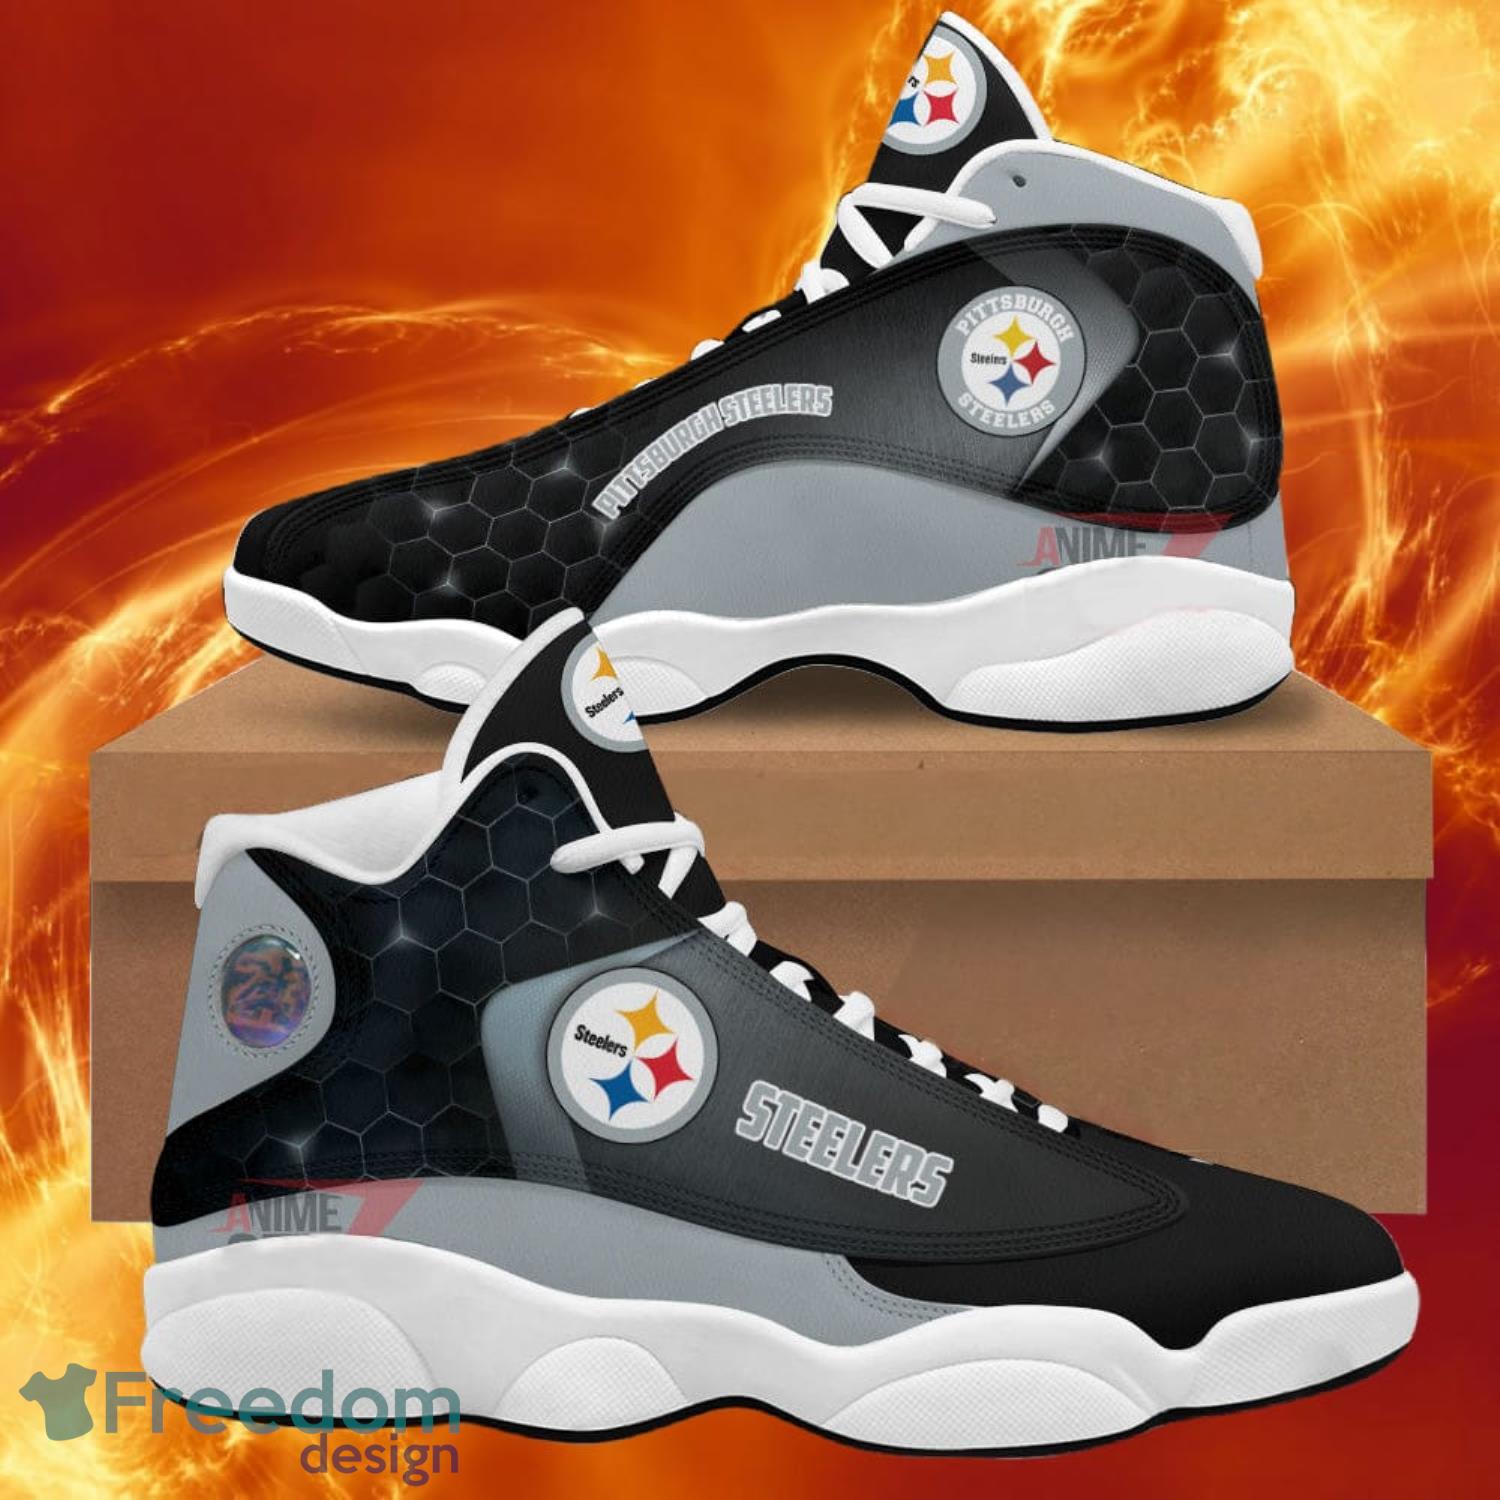 Pittsburgh Steelers Authentic Speed, Authentic Full Size, NFL, Collectibles, Open Catalogue